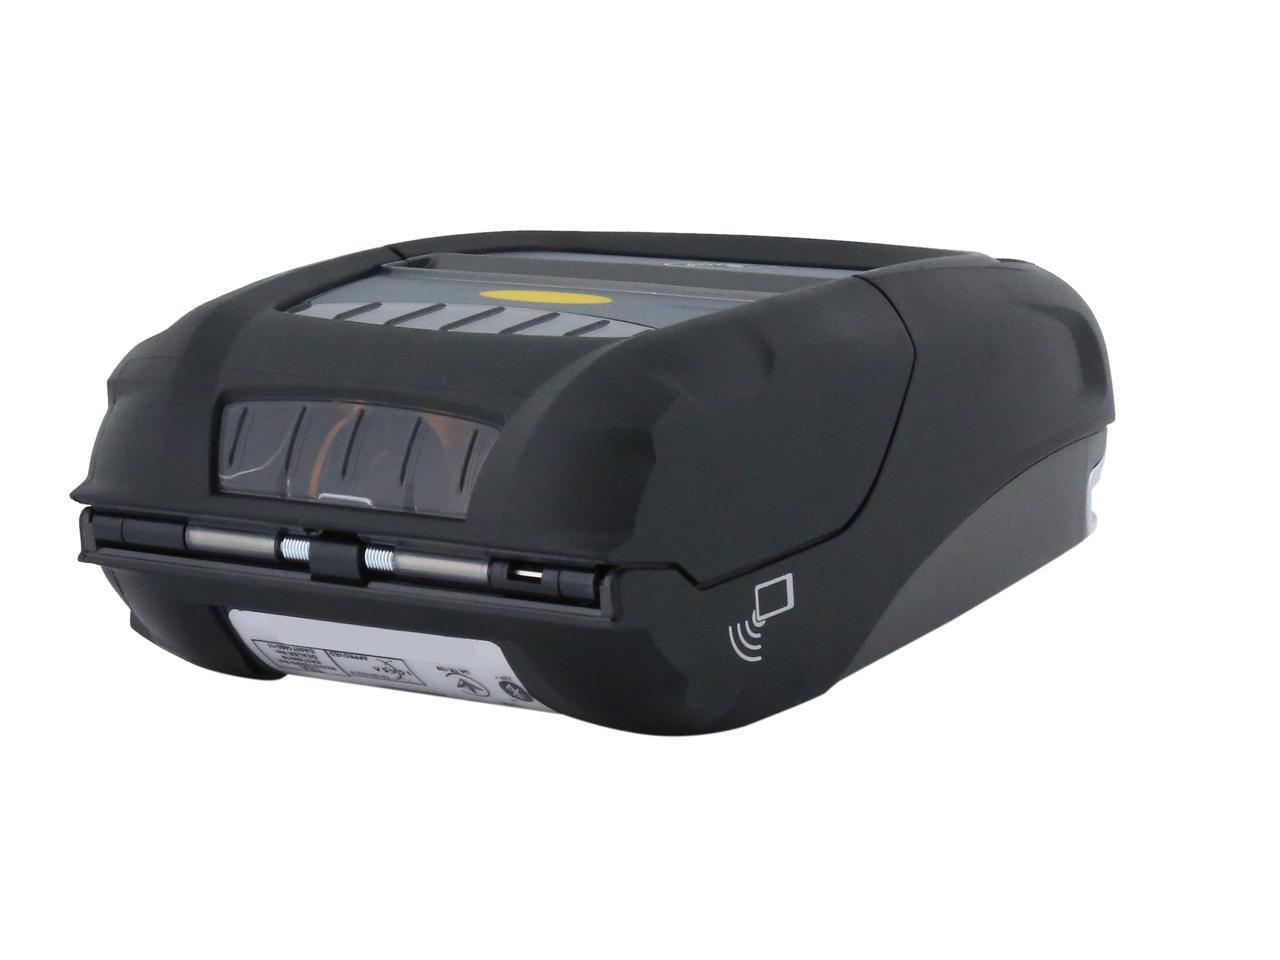 Zebra Zq510 3 Mobile Direct Thermal Receipt And Label Printer 203 Dpi Bluetooth 40 Linered 9085